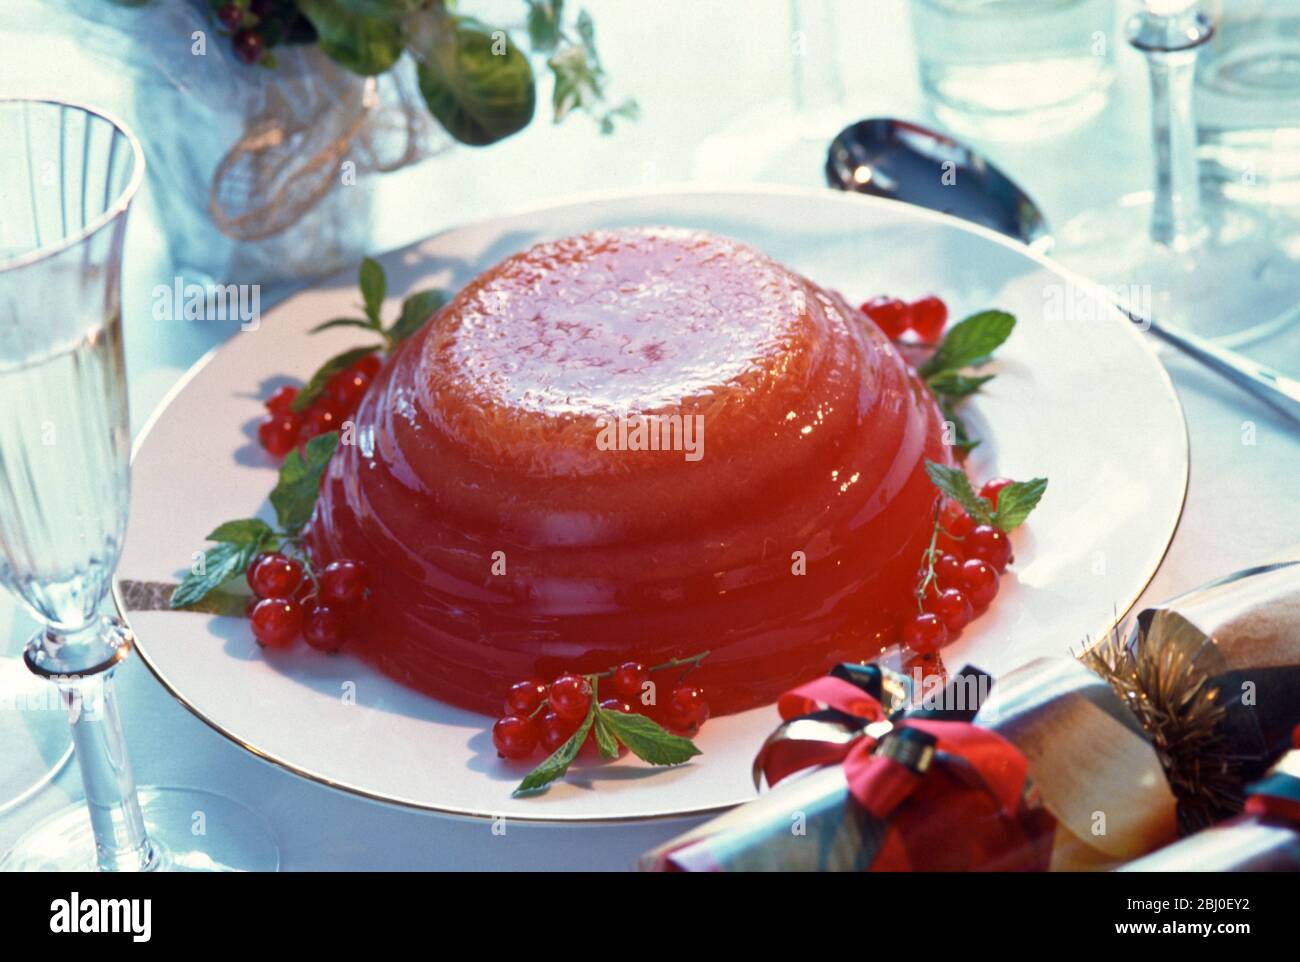 Alternative Christmas dessert - jelly (jello) of red berries set in fluted bowl and decorated with redcurrants - Stock Photo